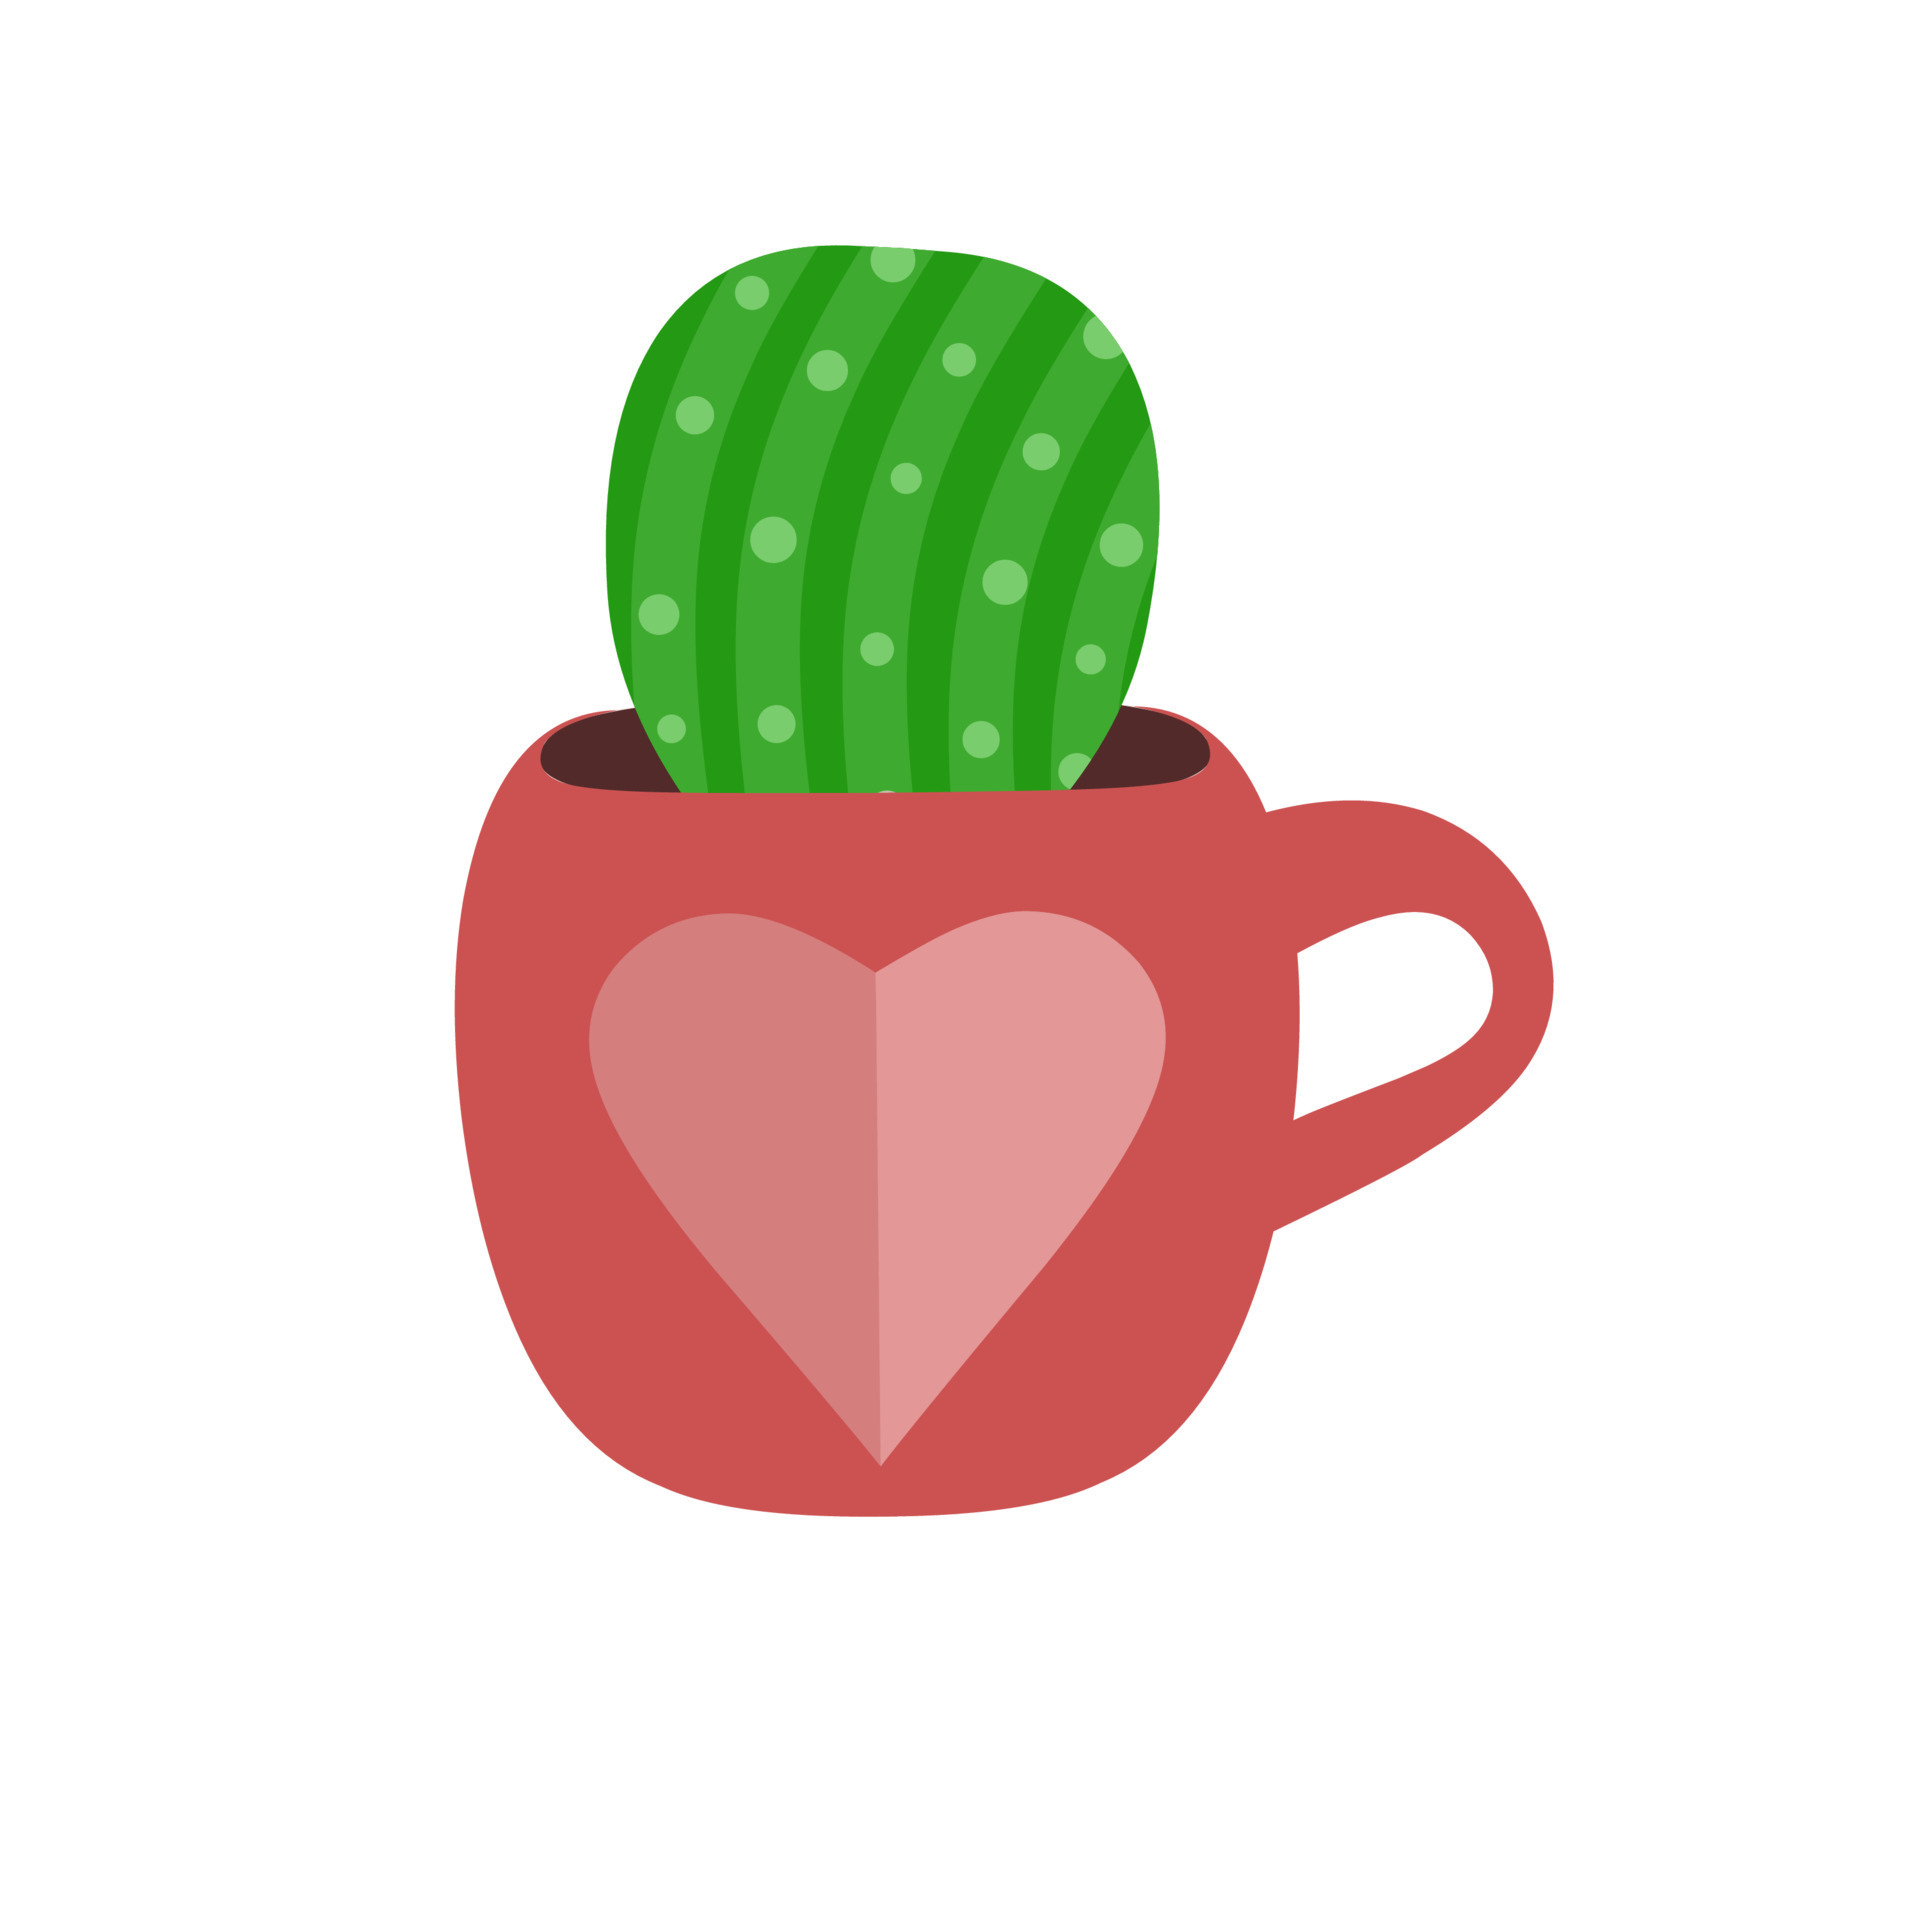 Vector graphics illustration of a cactus in a pink glass pot. cartoon cute  prickly cactus plant with love image. In flat style. Perfect for stickers,  home decor, children's book covers and web